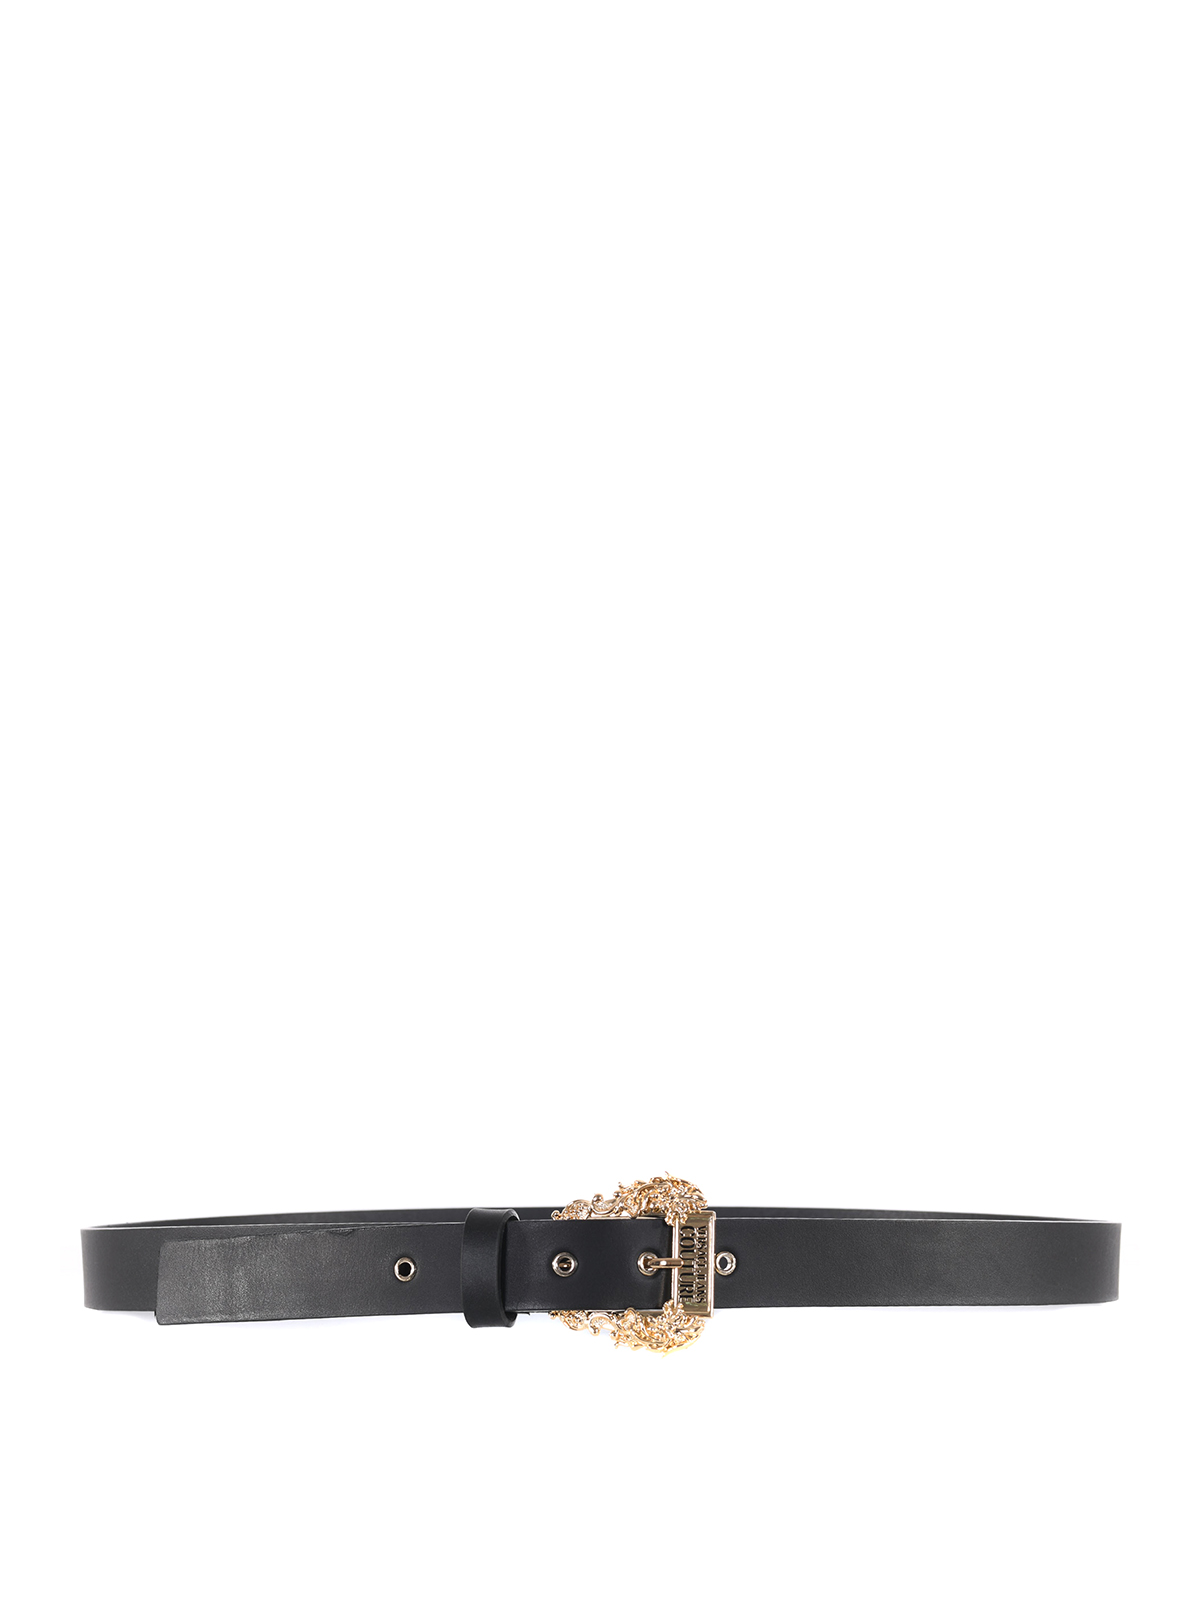 VERSACE JEANS COUTURE men's belt with gold buckle